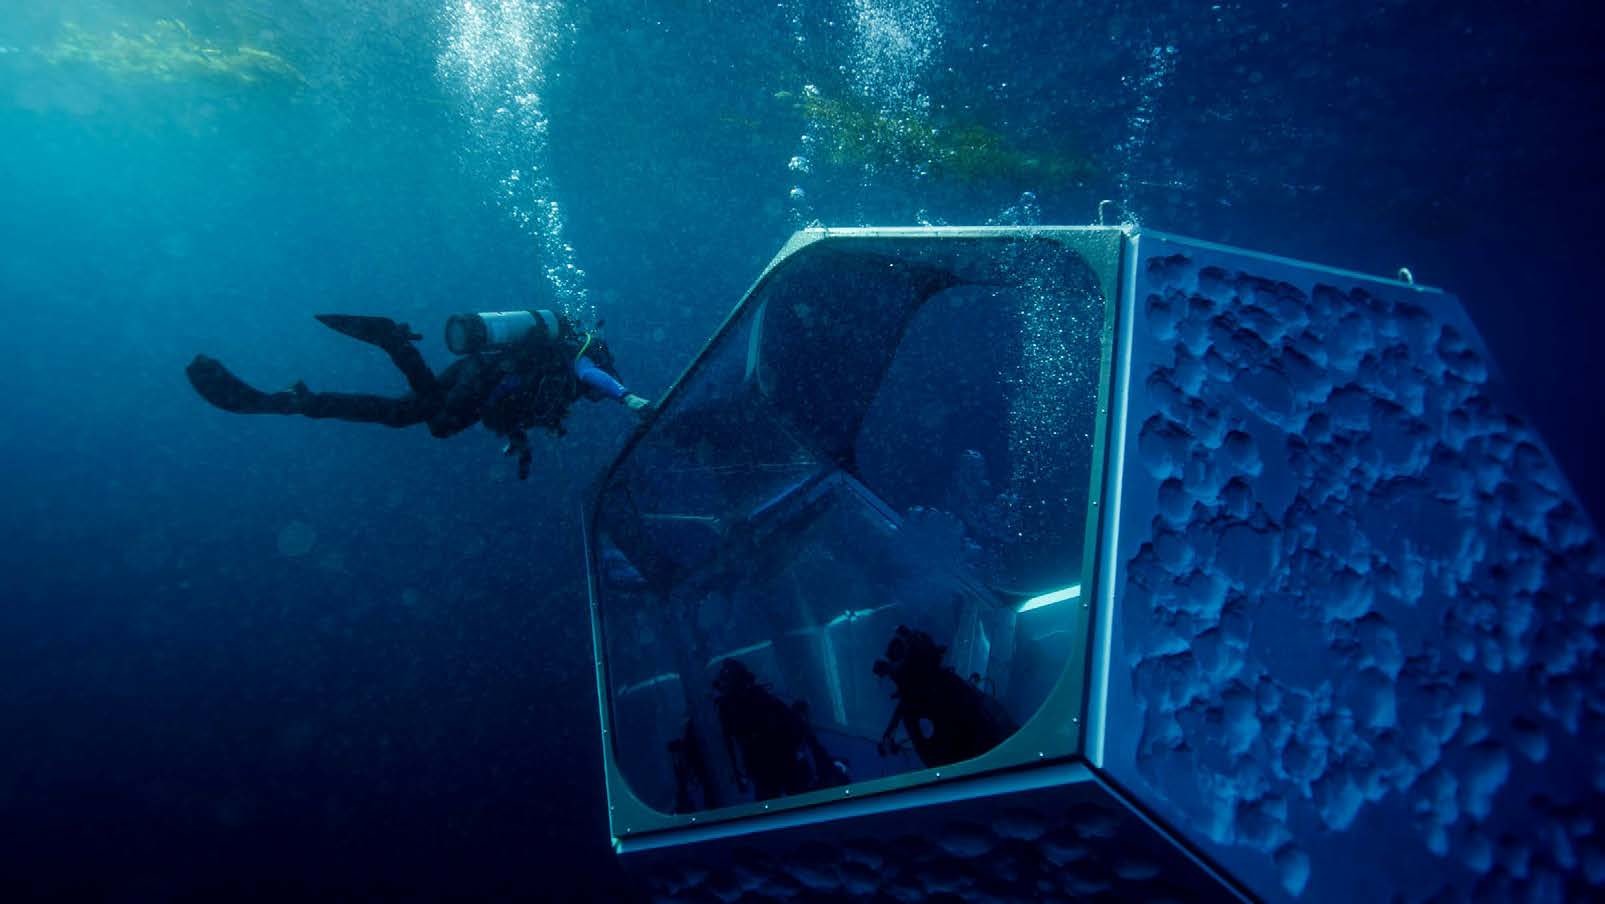 Doug Aitken,&amp;nbsp;Underwater Pavilions,&amp;nbsp;2016, installation view, Avalon, CA.&amp;nbsp;

Courtesy of the Artist, Parley for the Oceans and&amp;nbsp;The Museum of Contemporary Art, Los Angeles

&amp;nbsp;

INQUIRE